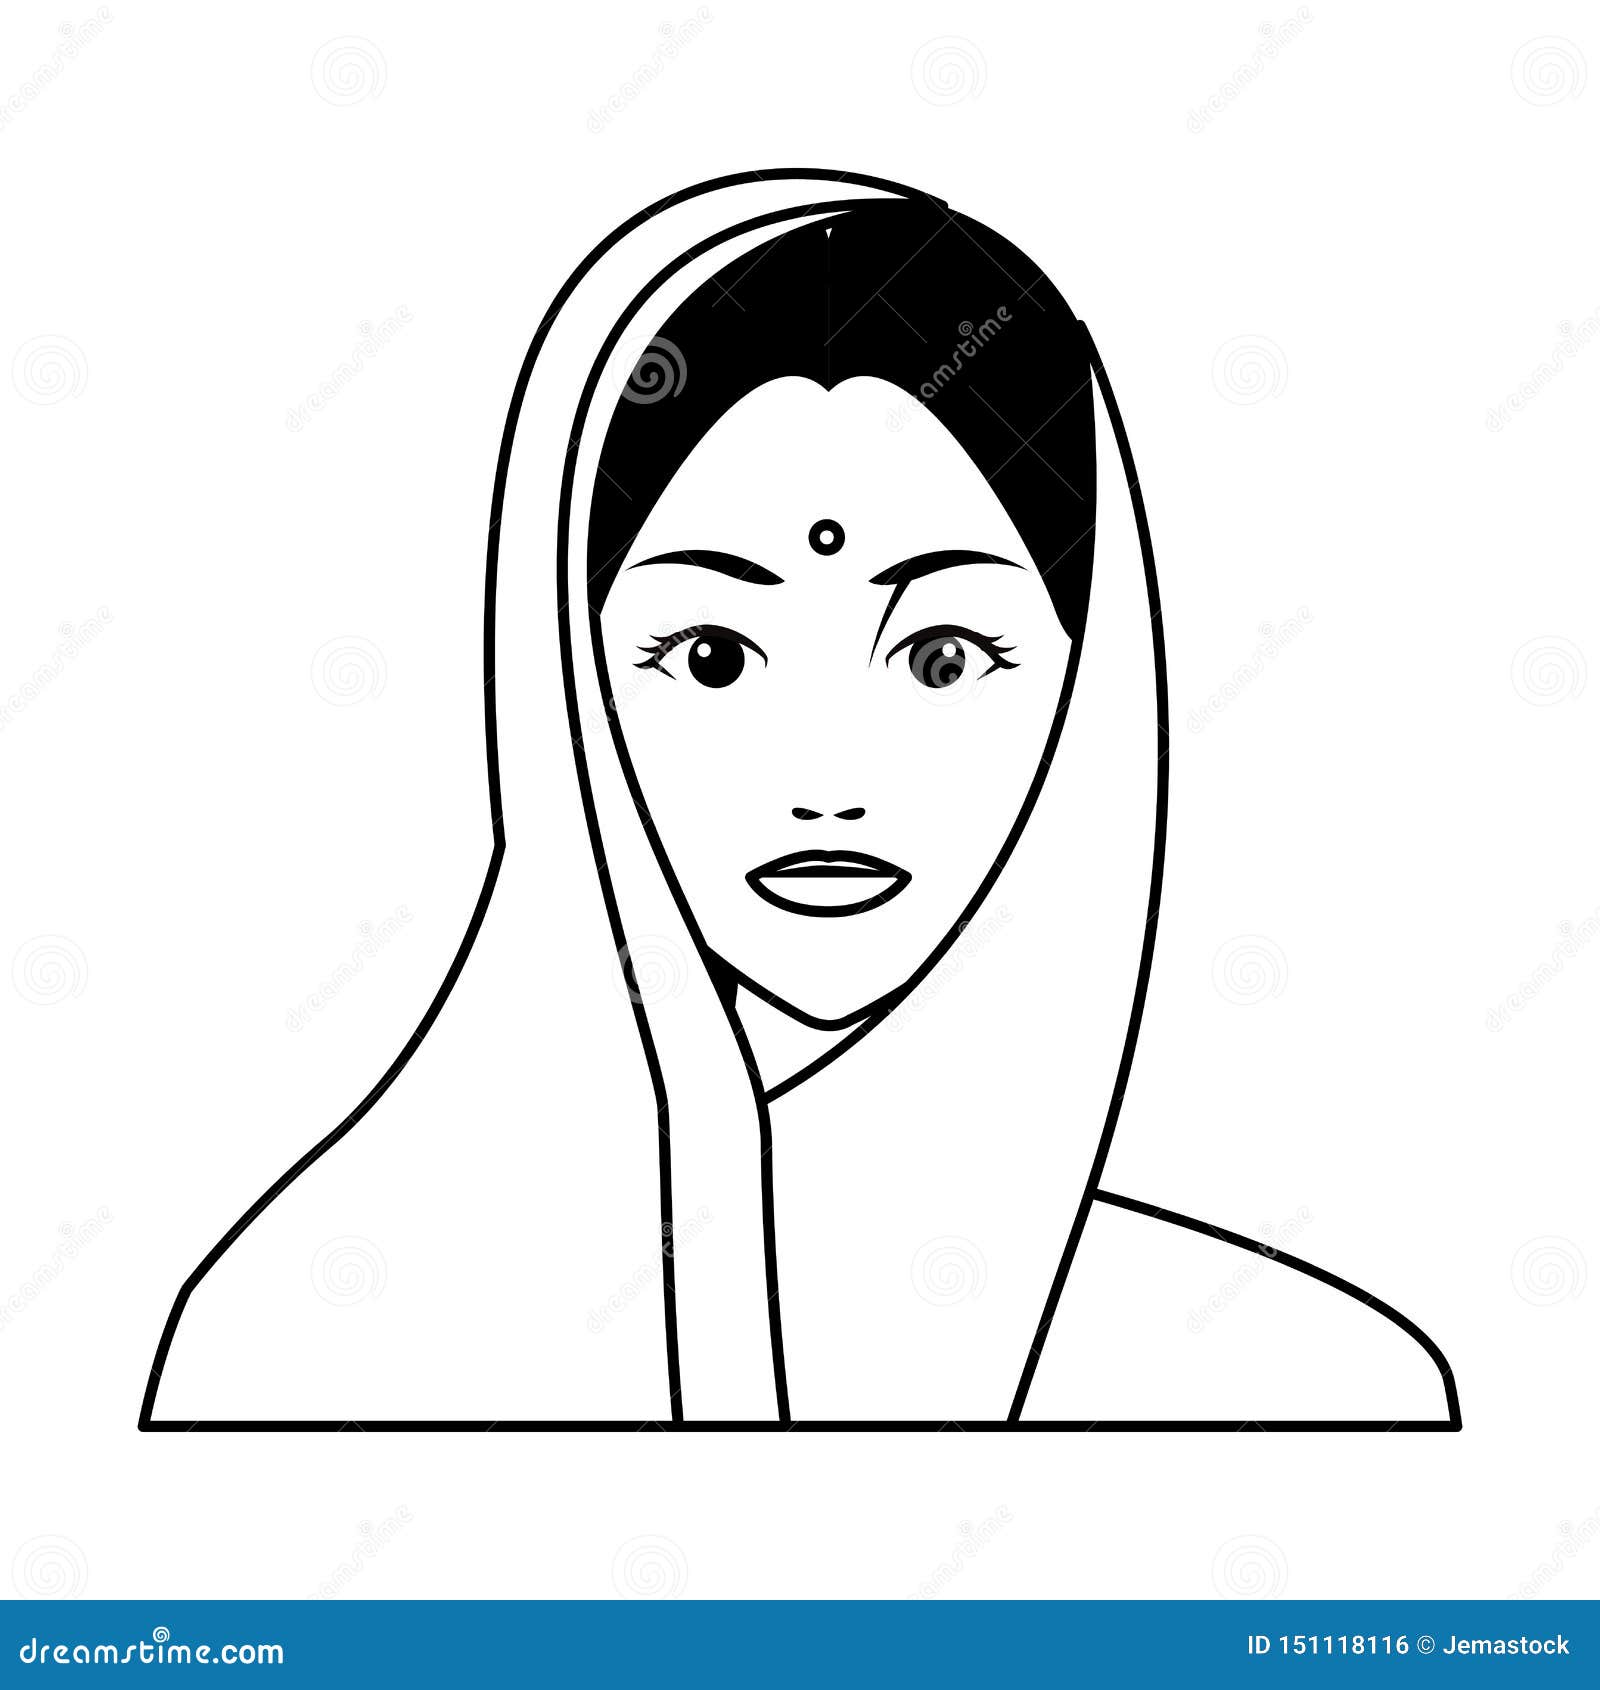 indian woman face avatar cartoon in black and white